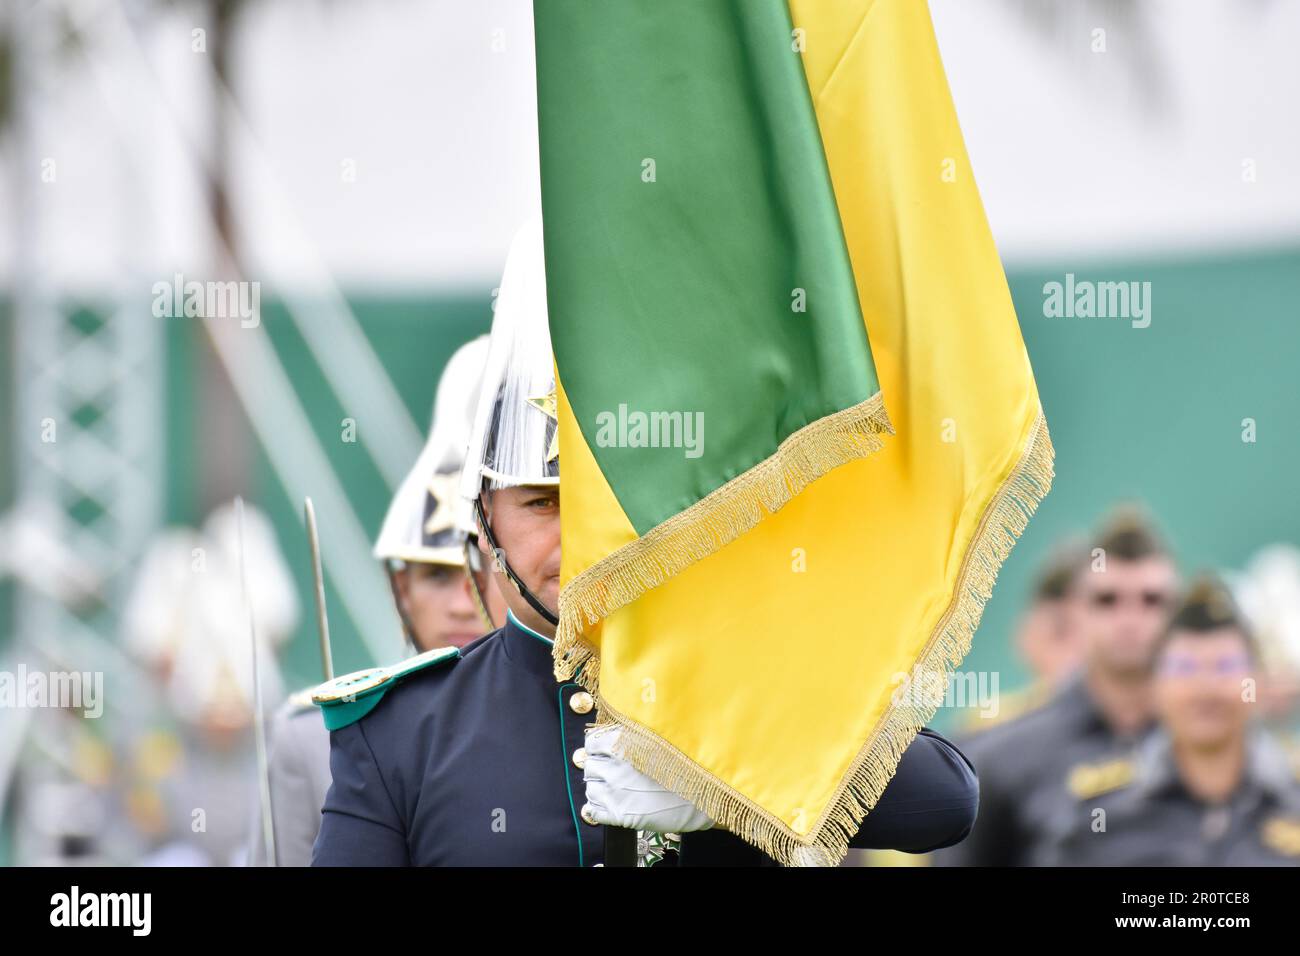 Bogota, Colombia. 09th May, 2023. during the ceremony of the new Colombian Police Director William Rene Salamanca at the General Santander Police Academy in Bogota, Colombia. May 9, 2023. Photo By: Cristian Bayona/Long Visual Press Credit: Long Visual Press/Alamy Live News Stock Photo